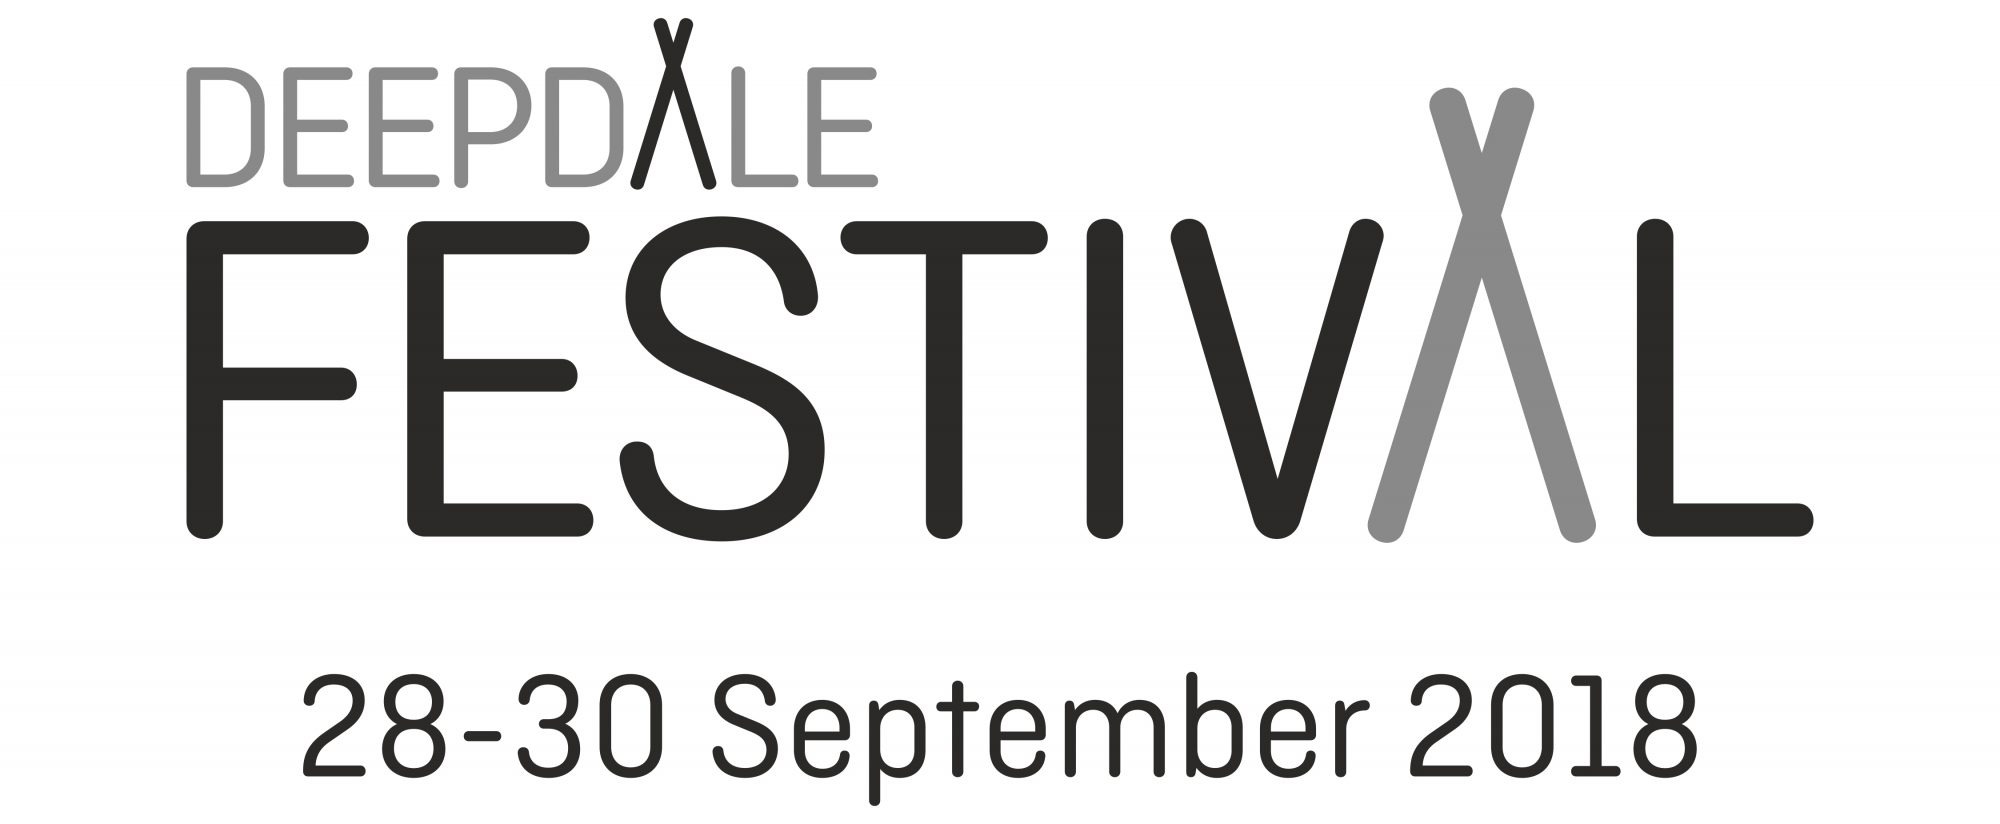 Deepdale Festival | Friday 28th to Sunday 30th September 2018